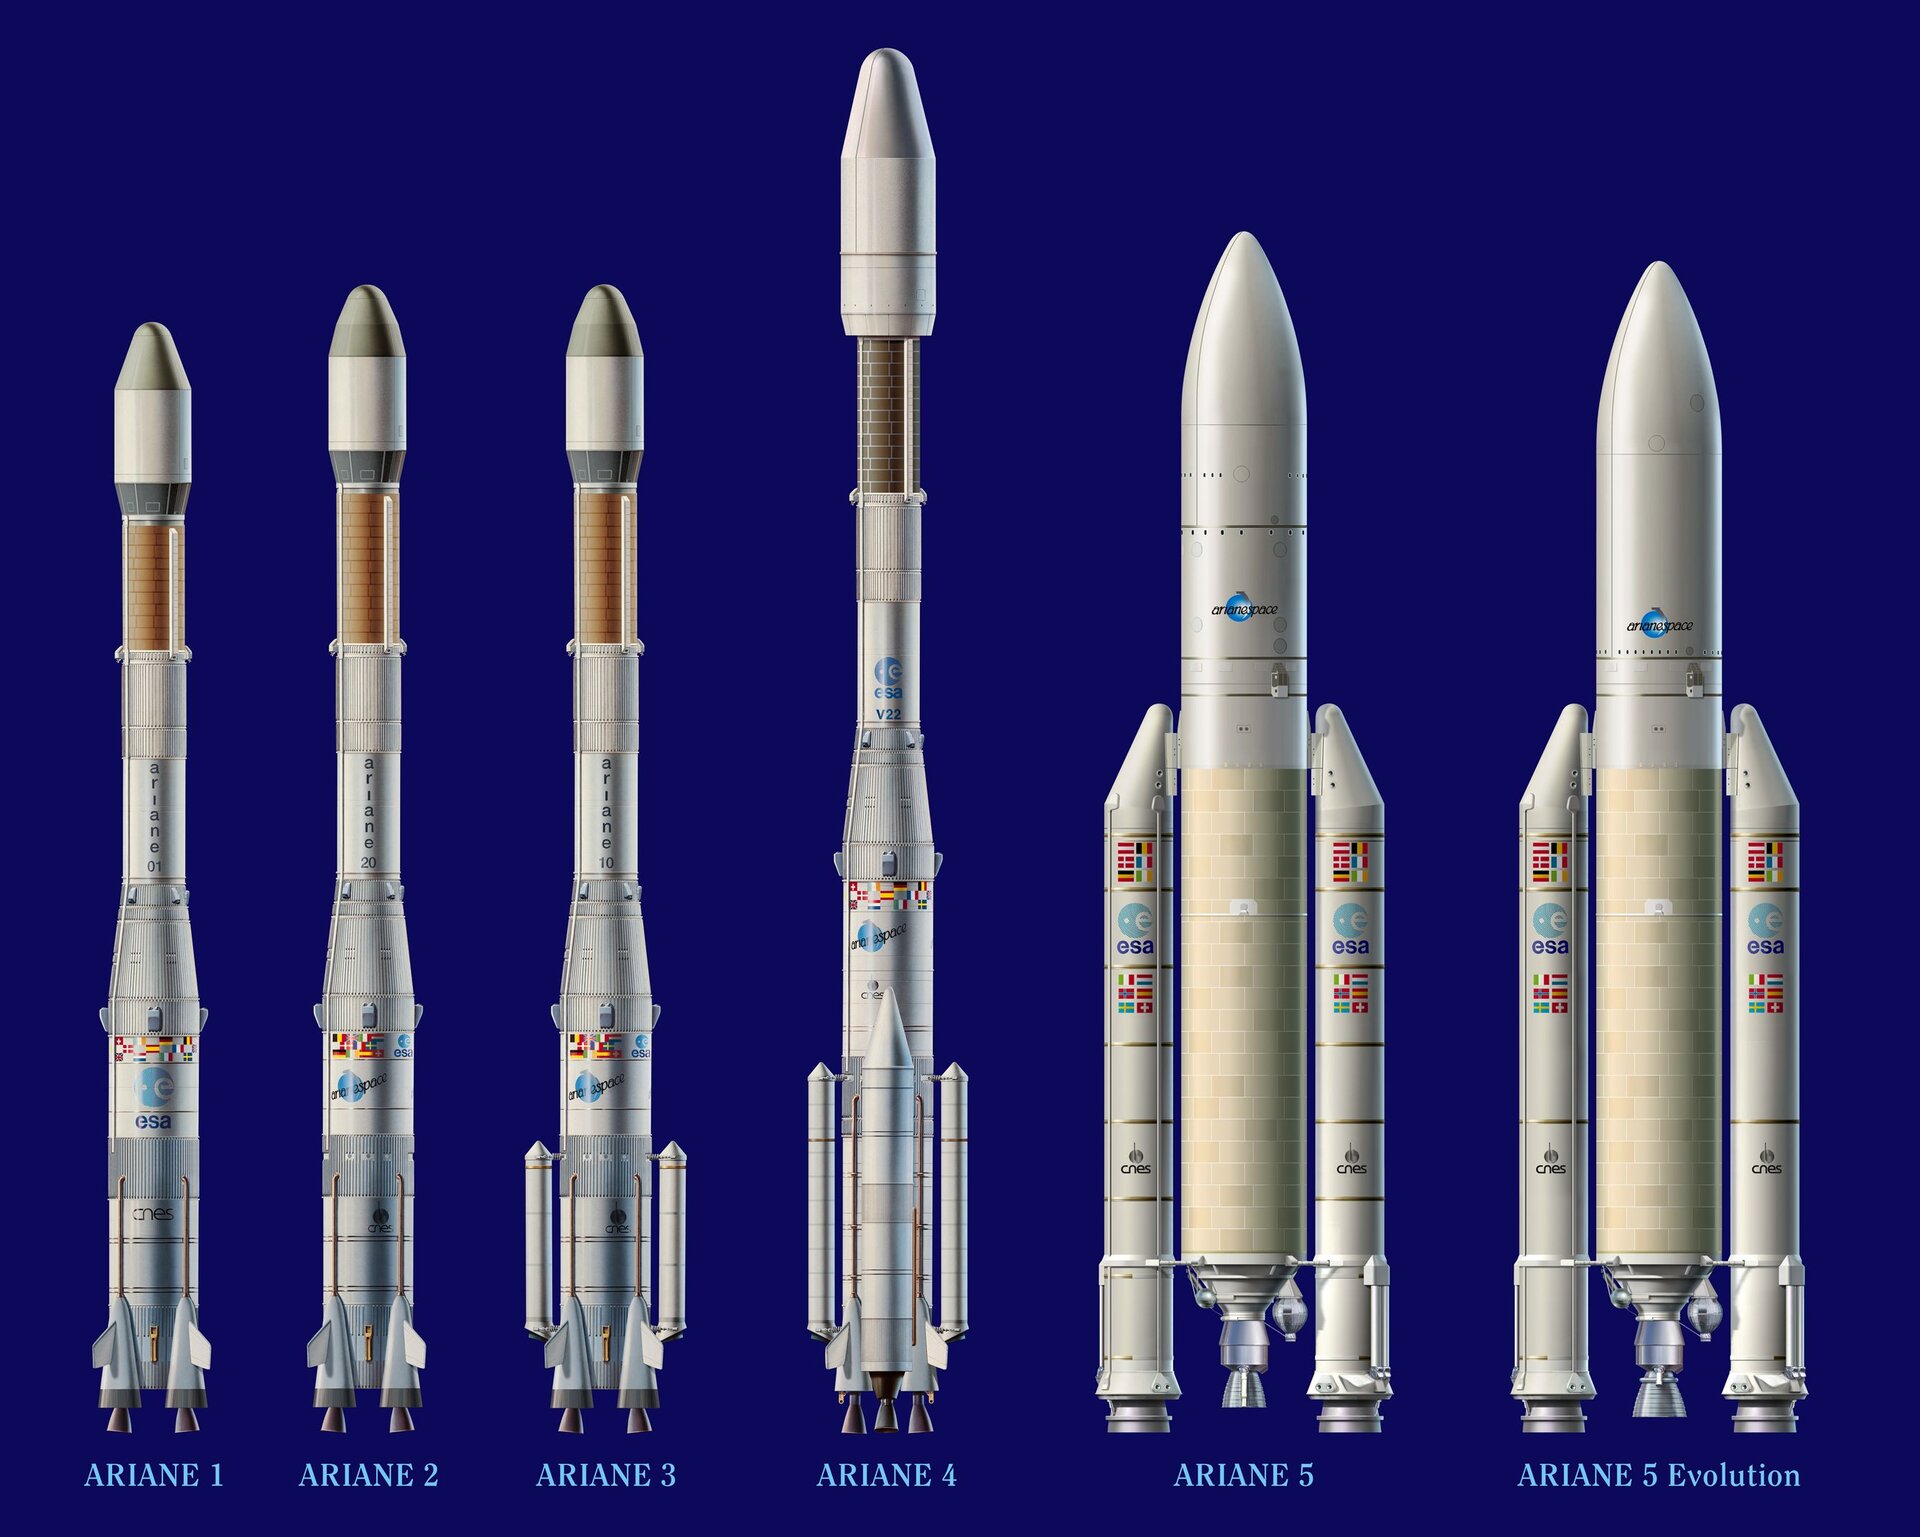 The Ariane launcher family artist's view